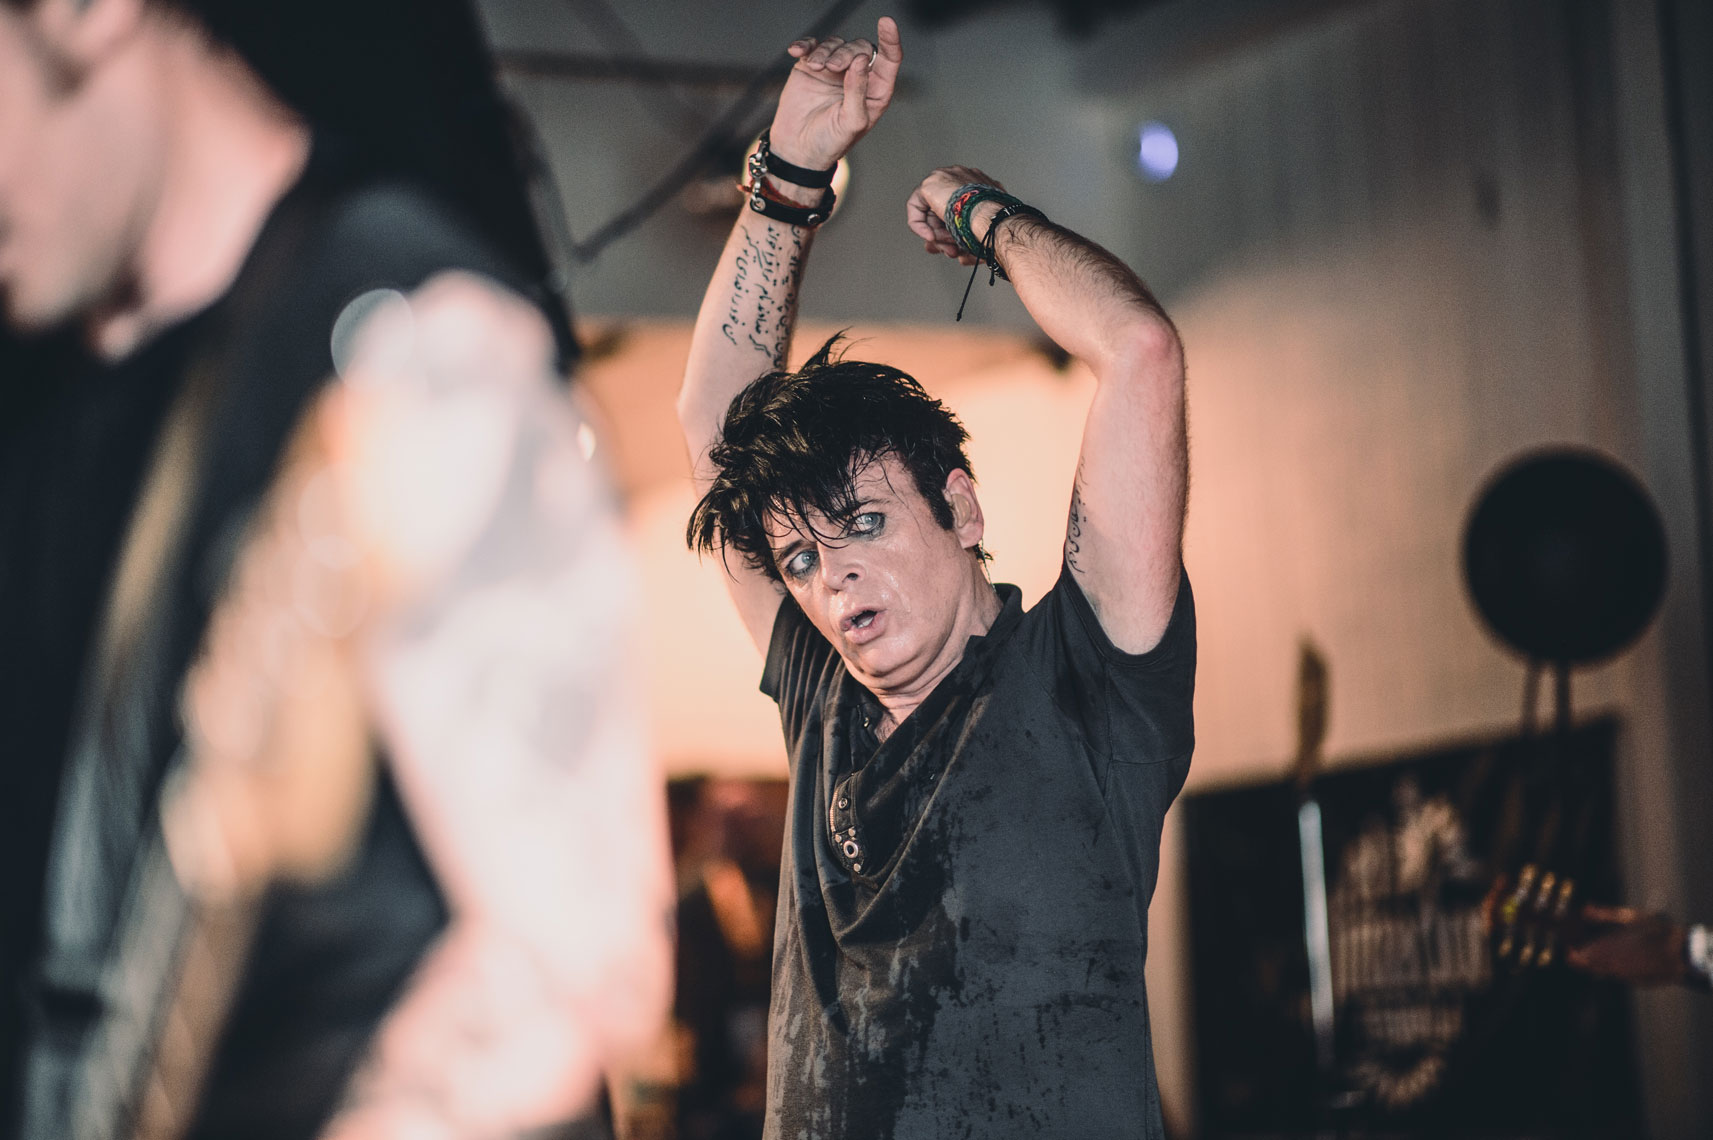 Gary-Numan-performs-at-the-Palm-Door-during-SXSW-2014-2